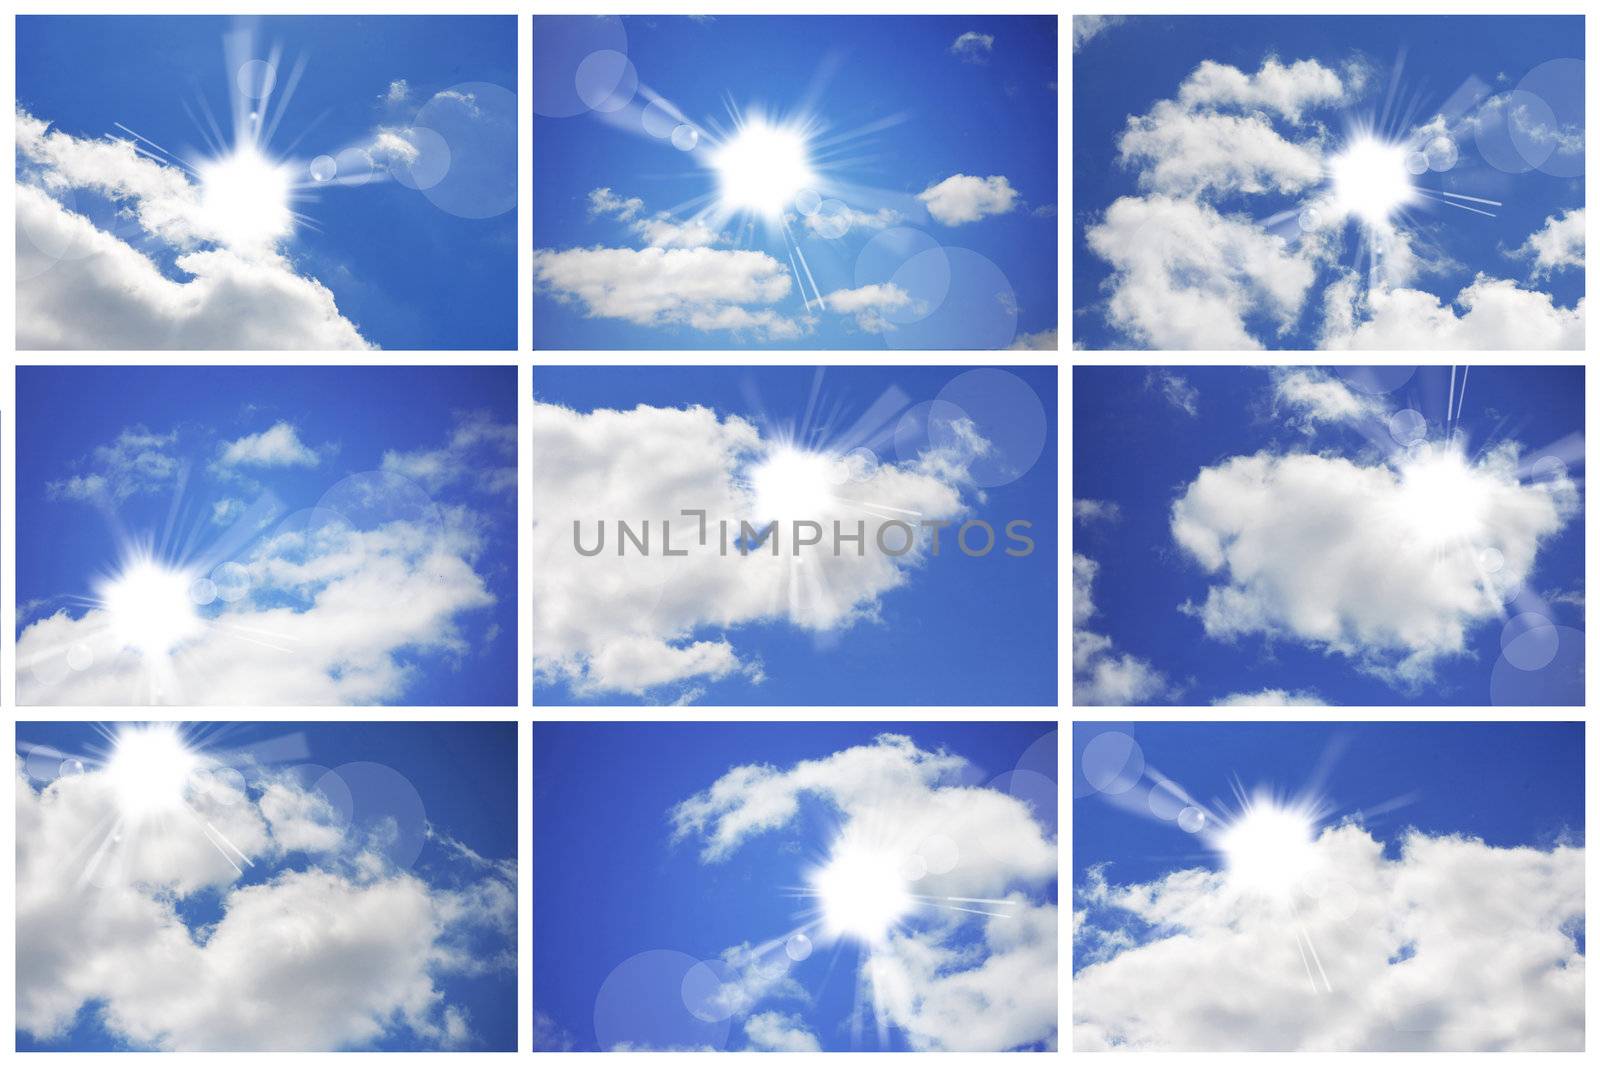 The bright sun in white clouds. A collage